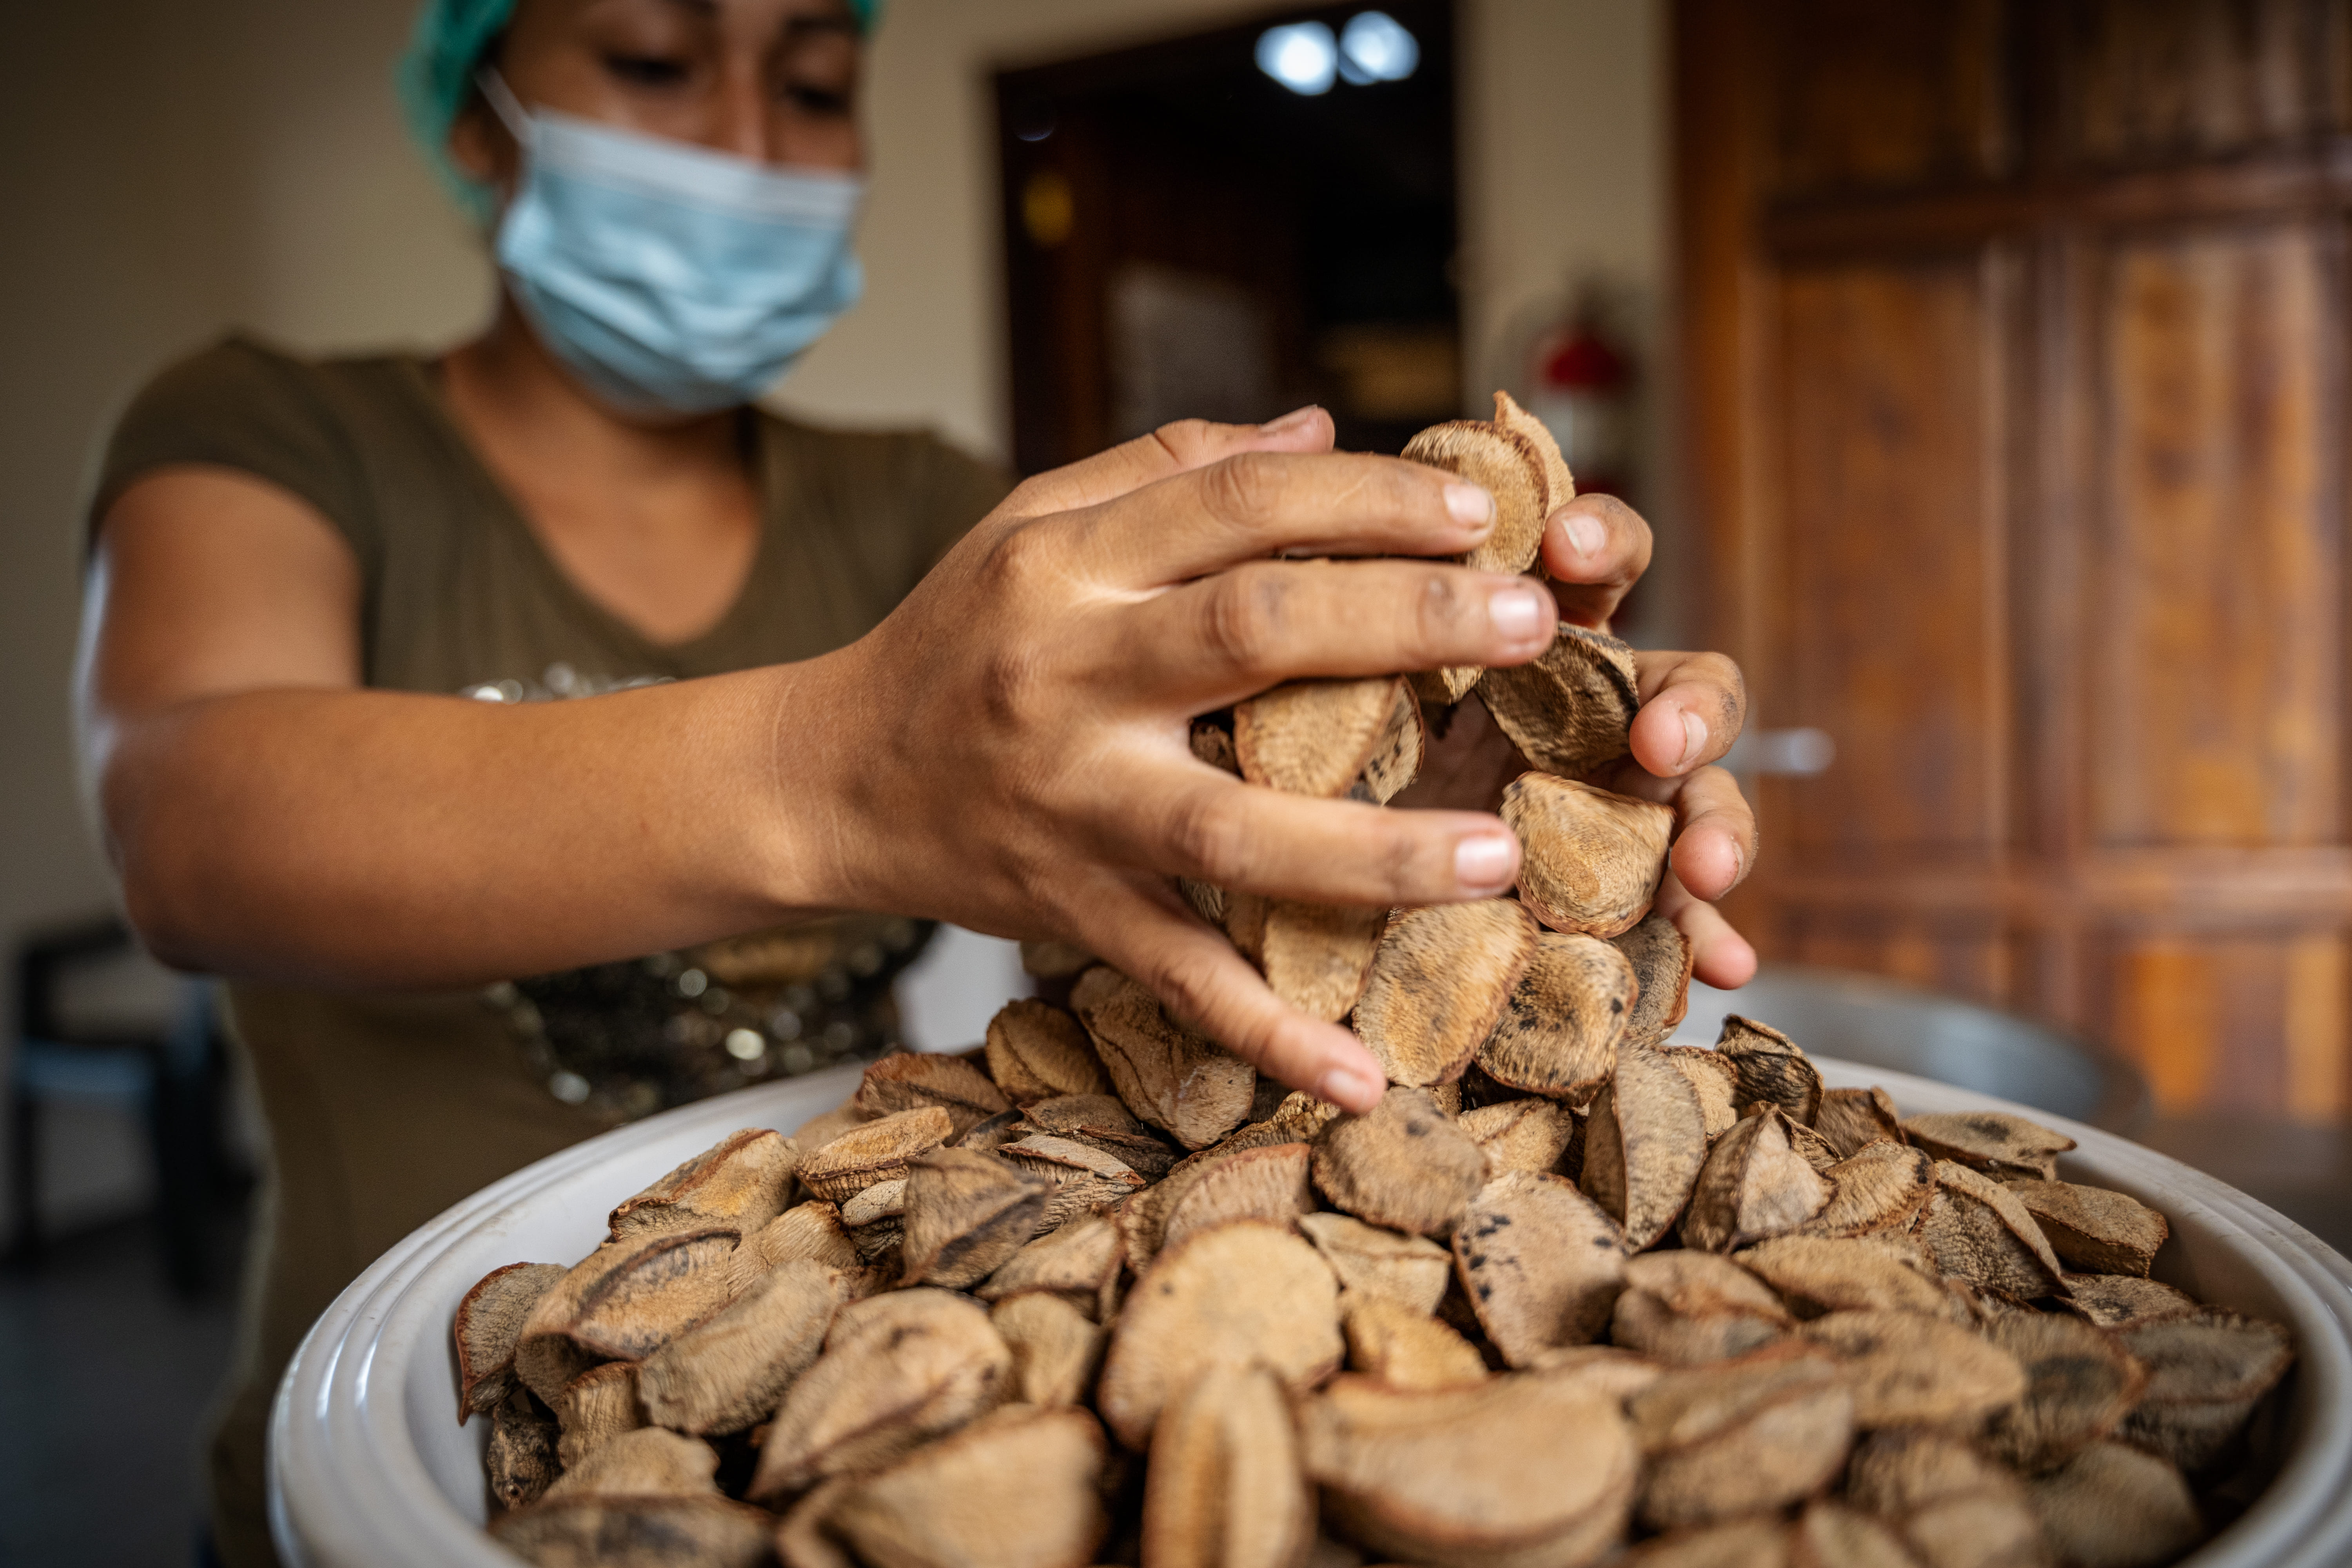 Brazil nuts are plenty here, though collecting and processing them is hard work.